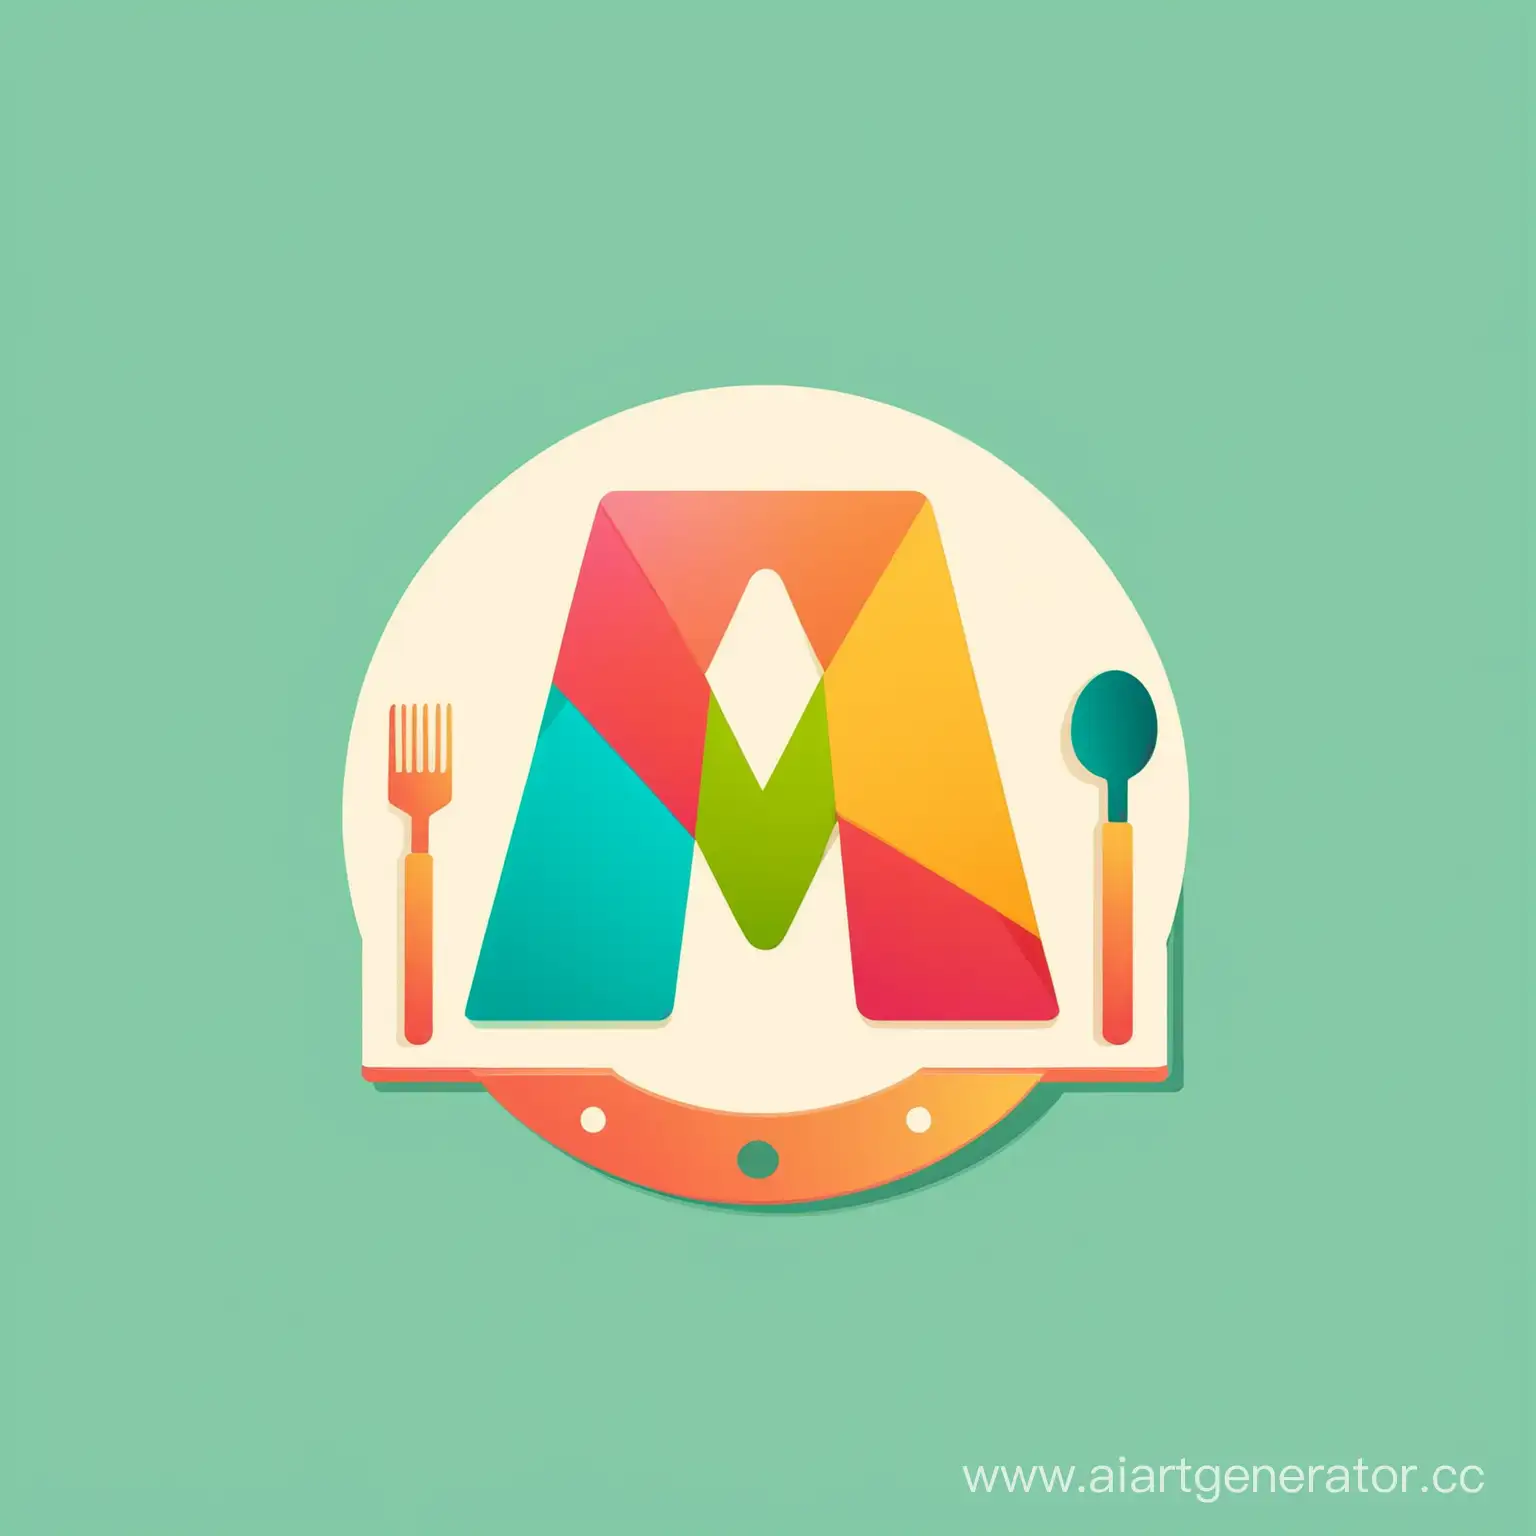 Colorful-Letter-M-Logo-with-Kitchen-Accessories-Simple-Vector-Graphics